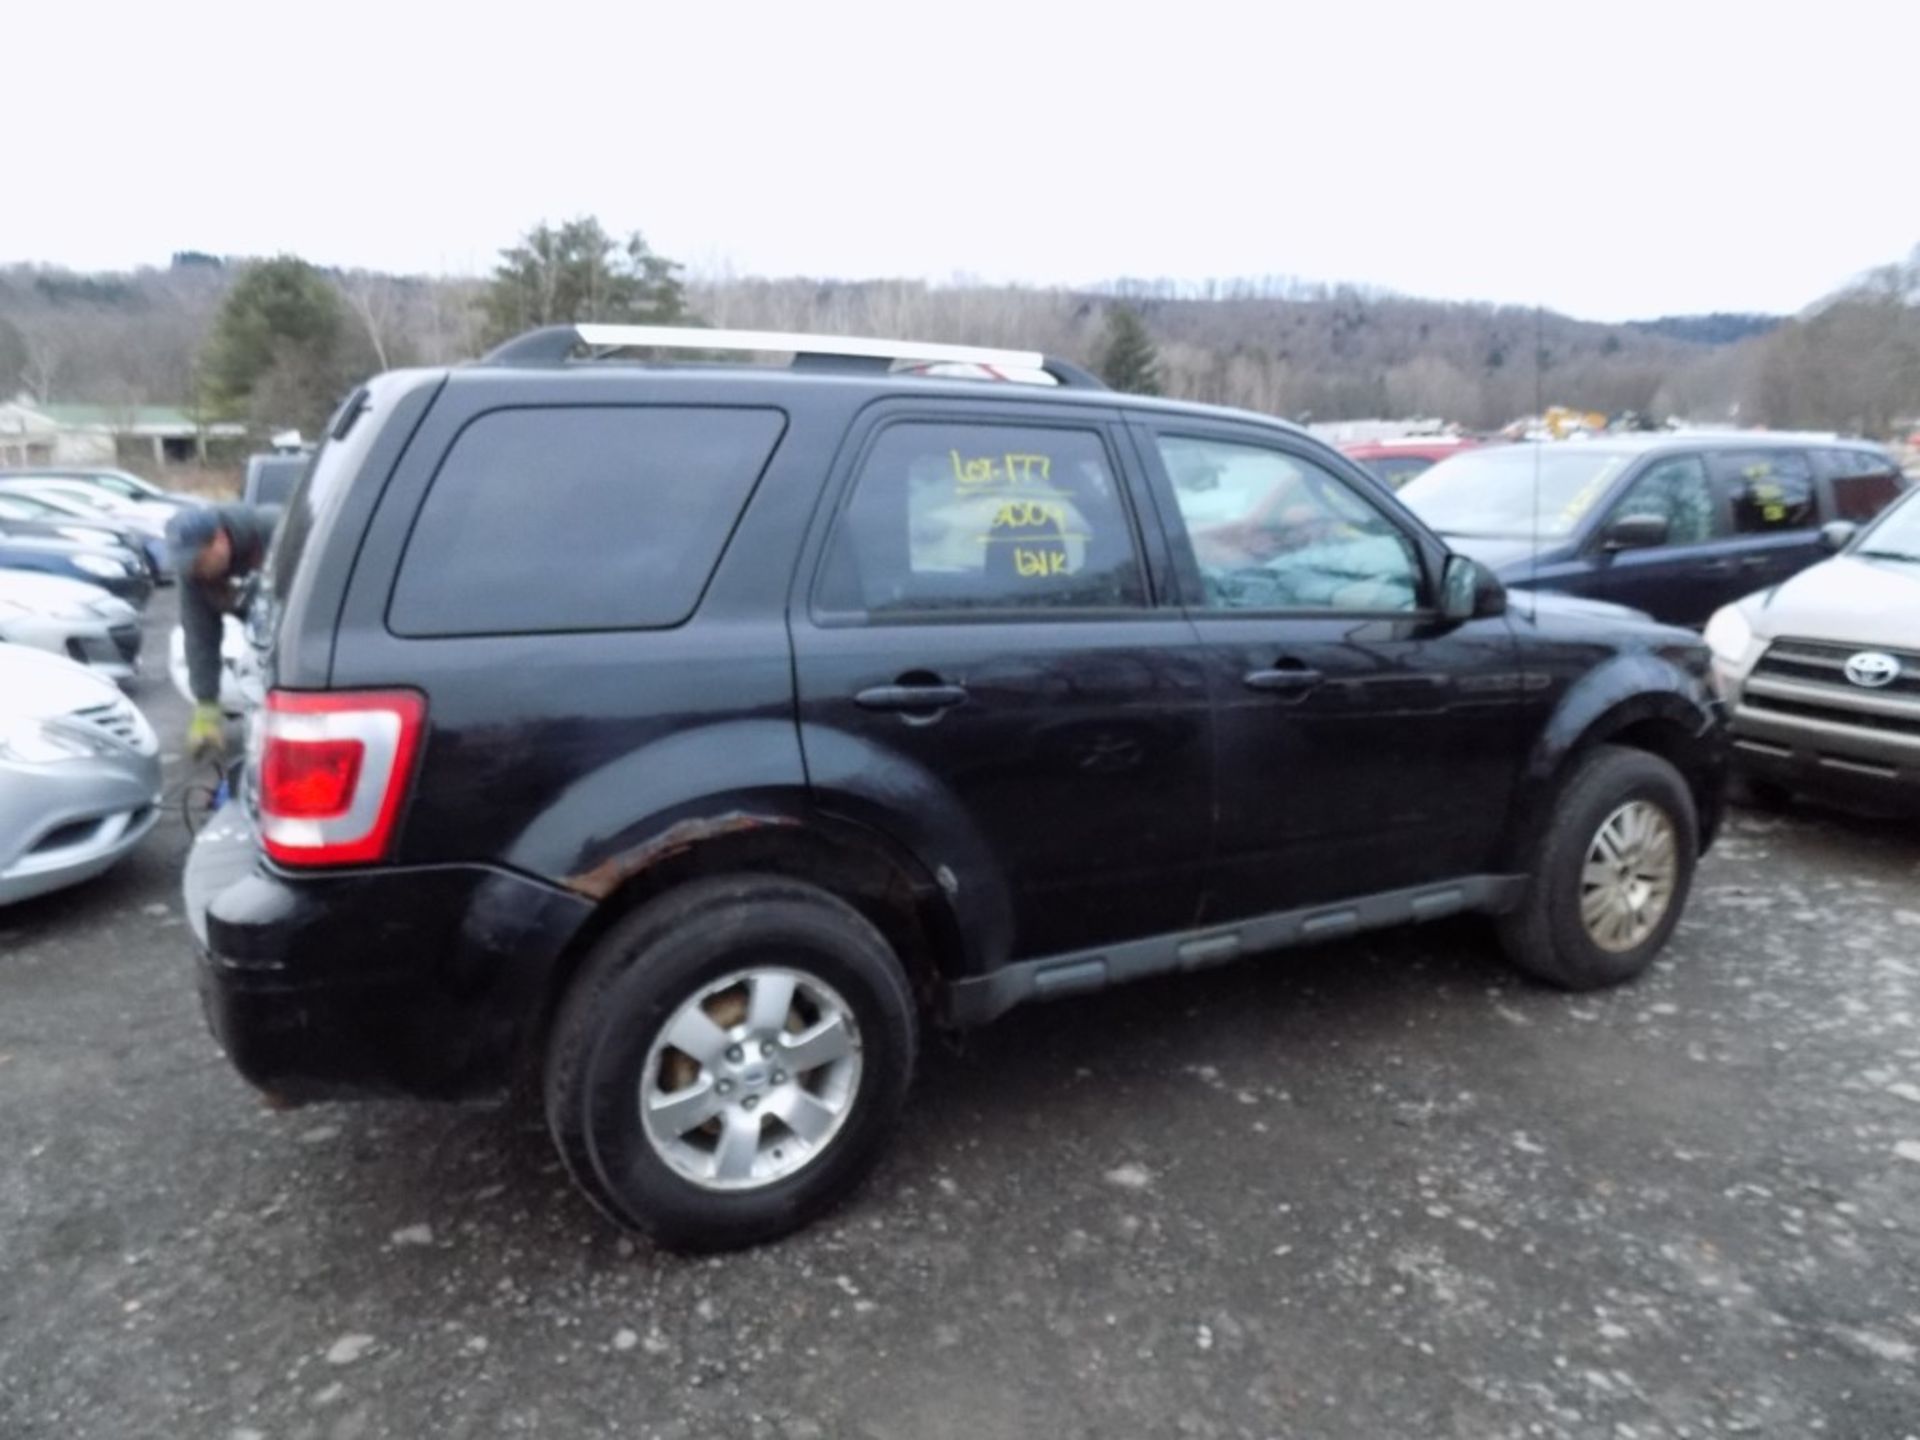 2009 Ford Escape Limited, 4x4, Black, Leather, Sunroof, 121,531 Miles, VIN#: 1FMCU94G09KC66421, - Image 6 of 12